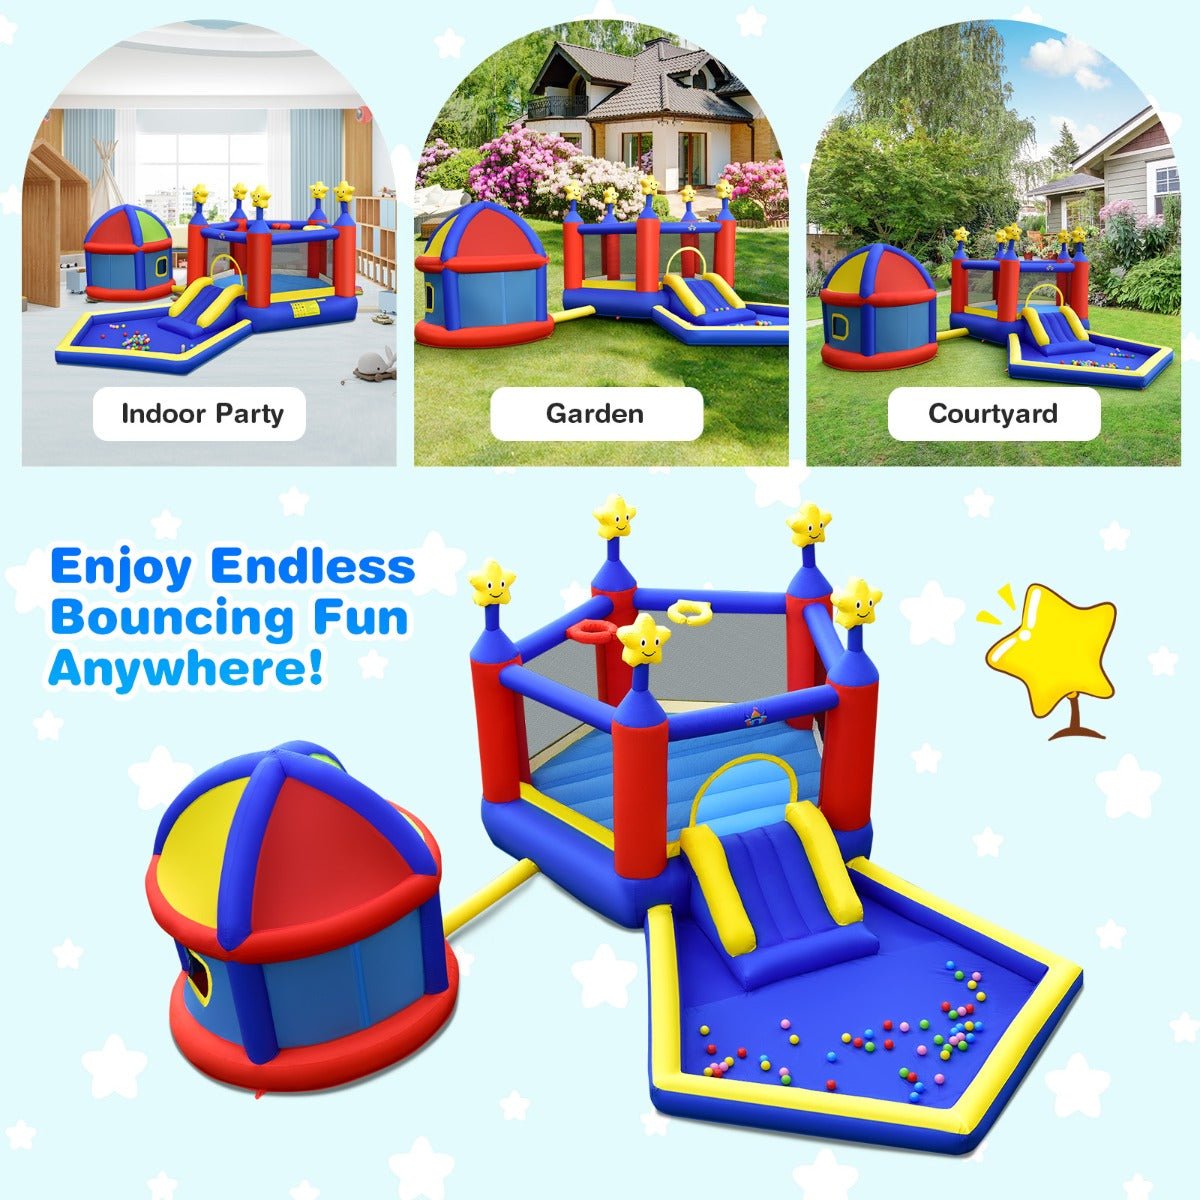 Inflatable Bouncy House with Dual Basketball Hoops - Energetic Play for Kids